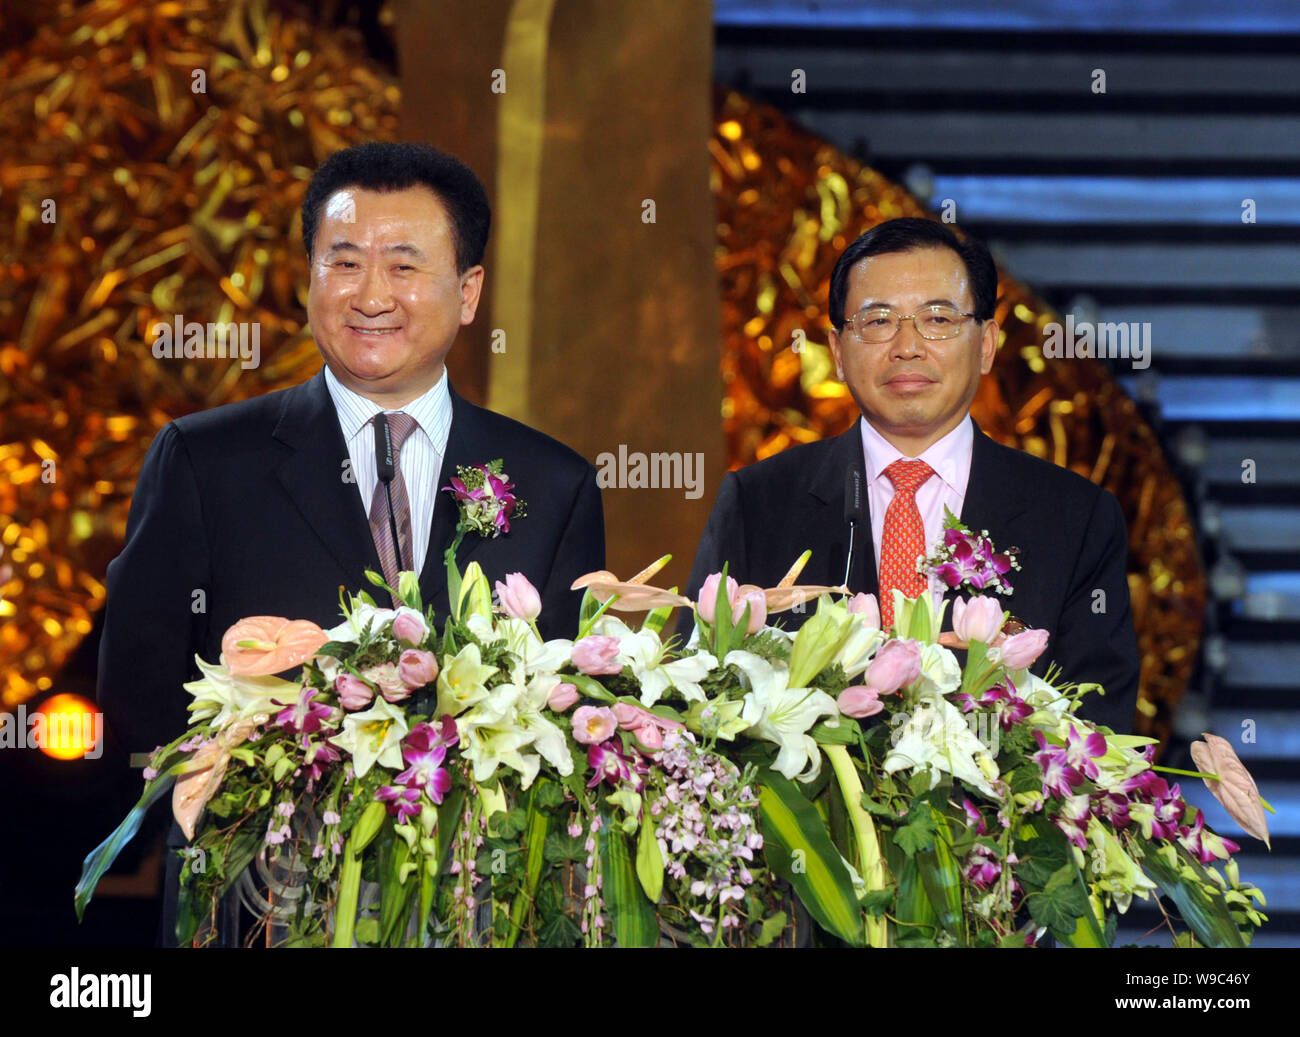 Wang Jianlin, left, Chairman and President of Dalian Wanda Group, and Li Dongsheng, Chairman and President of TCL Corporation, are seen at the 2009 CC Stock Photo